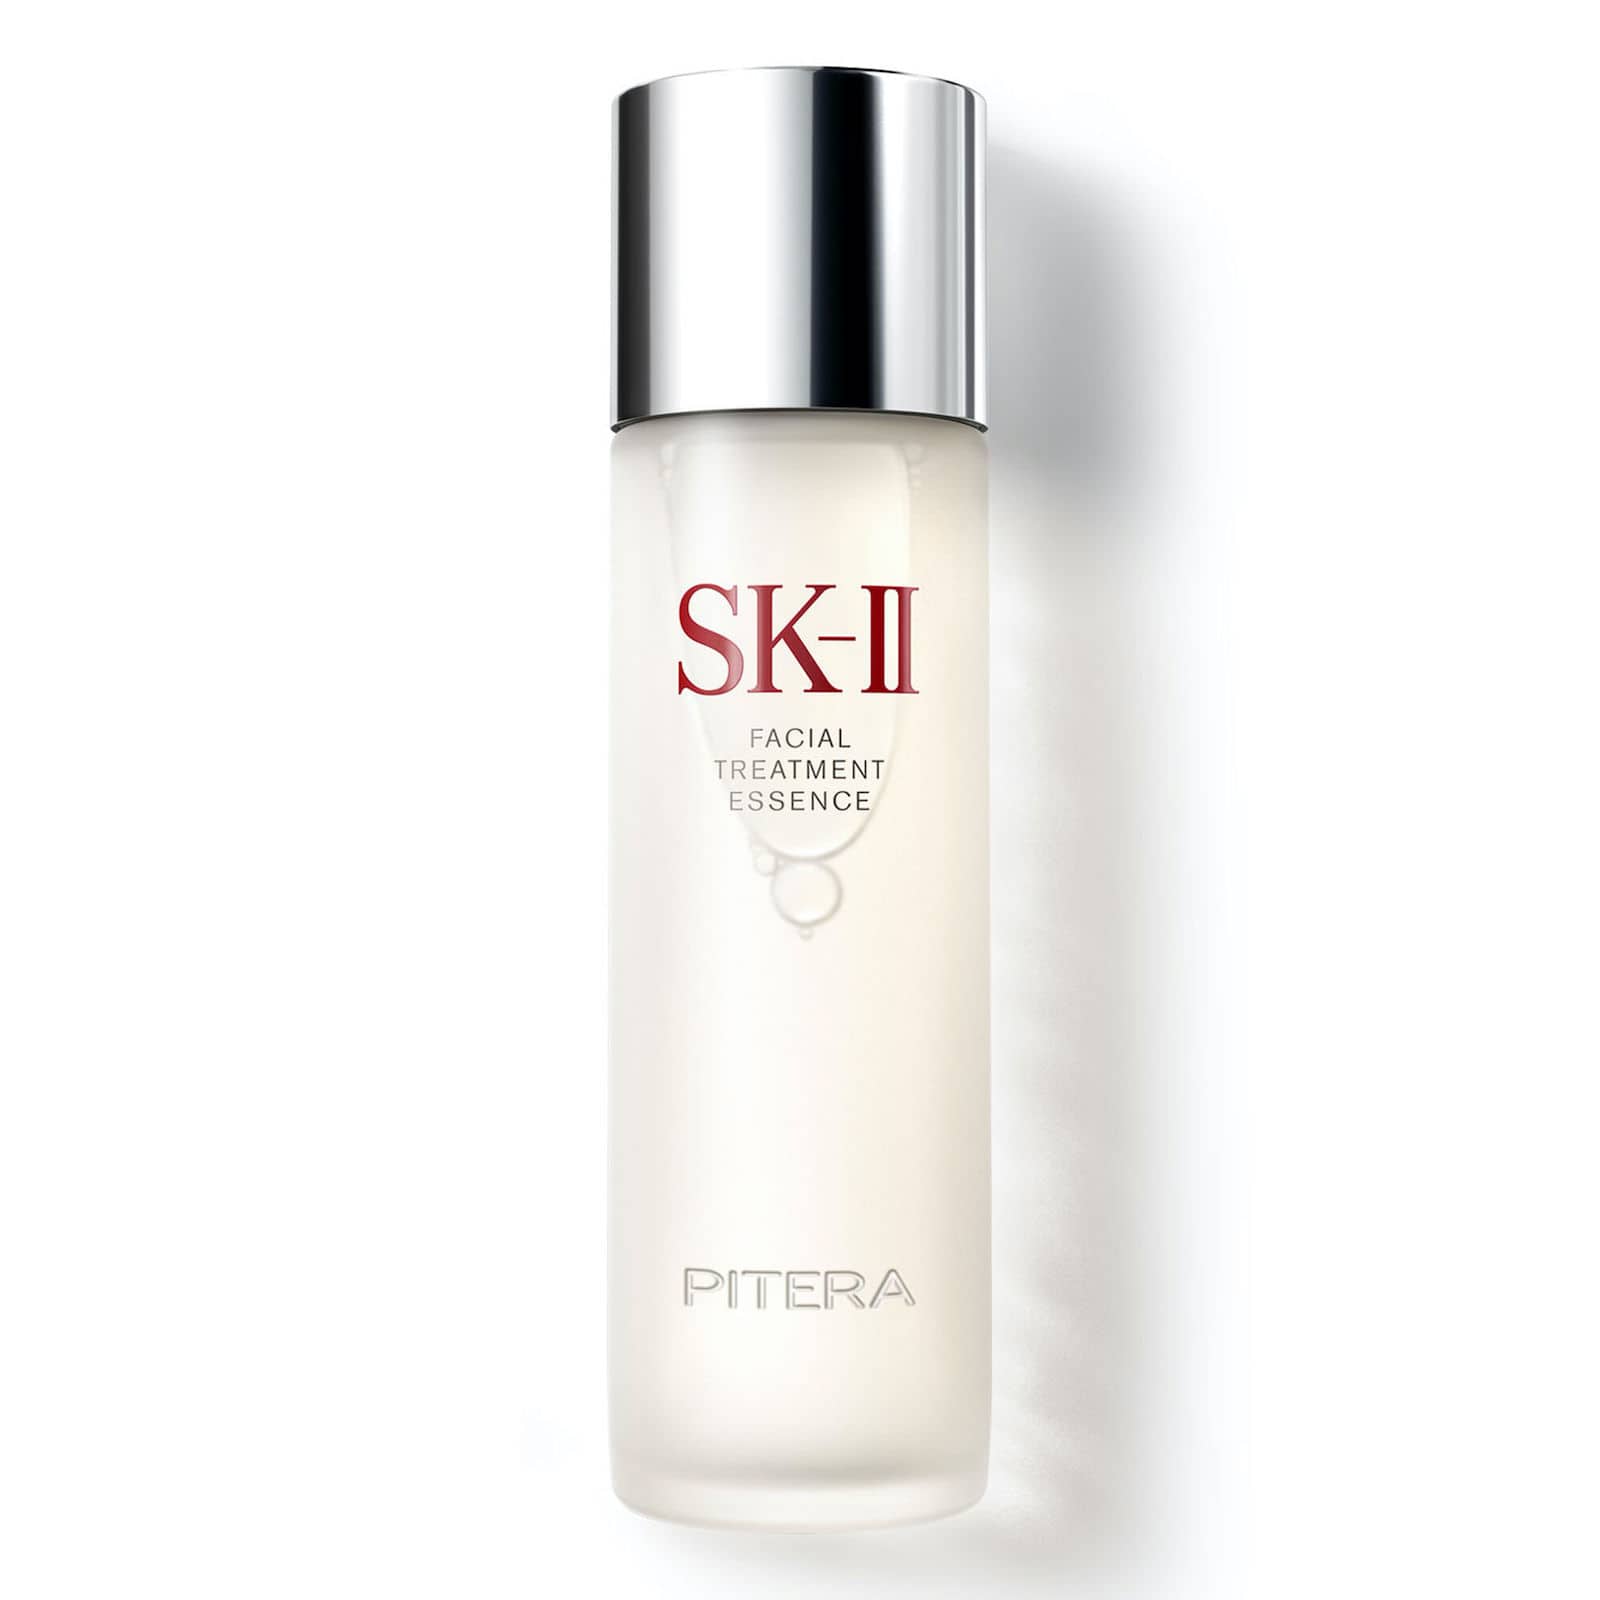 A frosted glass bottle with a silver screw top, reading “SK-II Facial Treatment Essence”